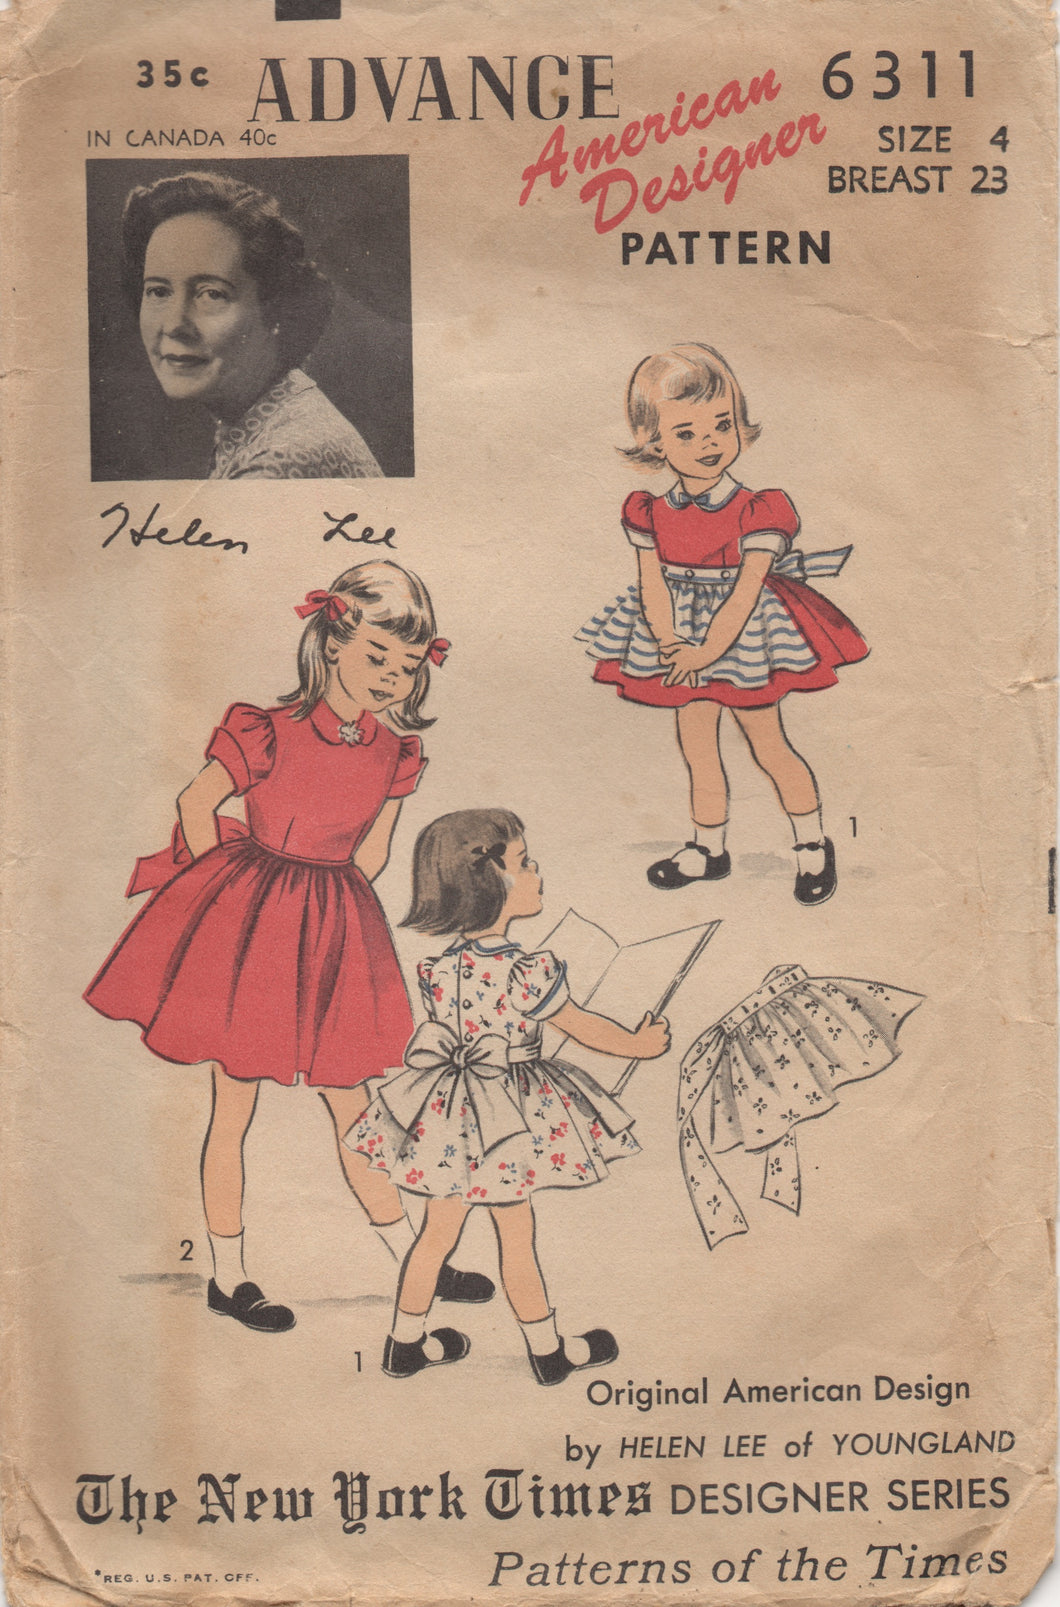 1950's Advance by HELEN LEE Child's One Piece Dress with Peter Pan Collar and Apron - Chest 23